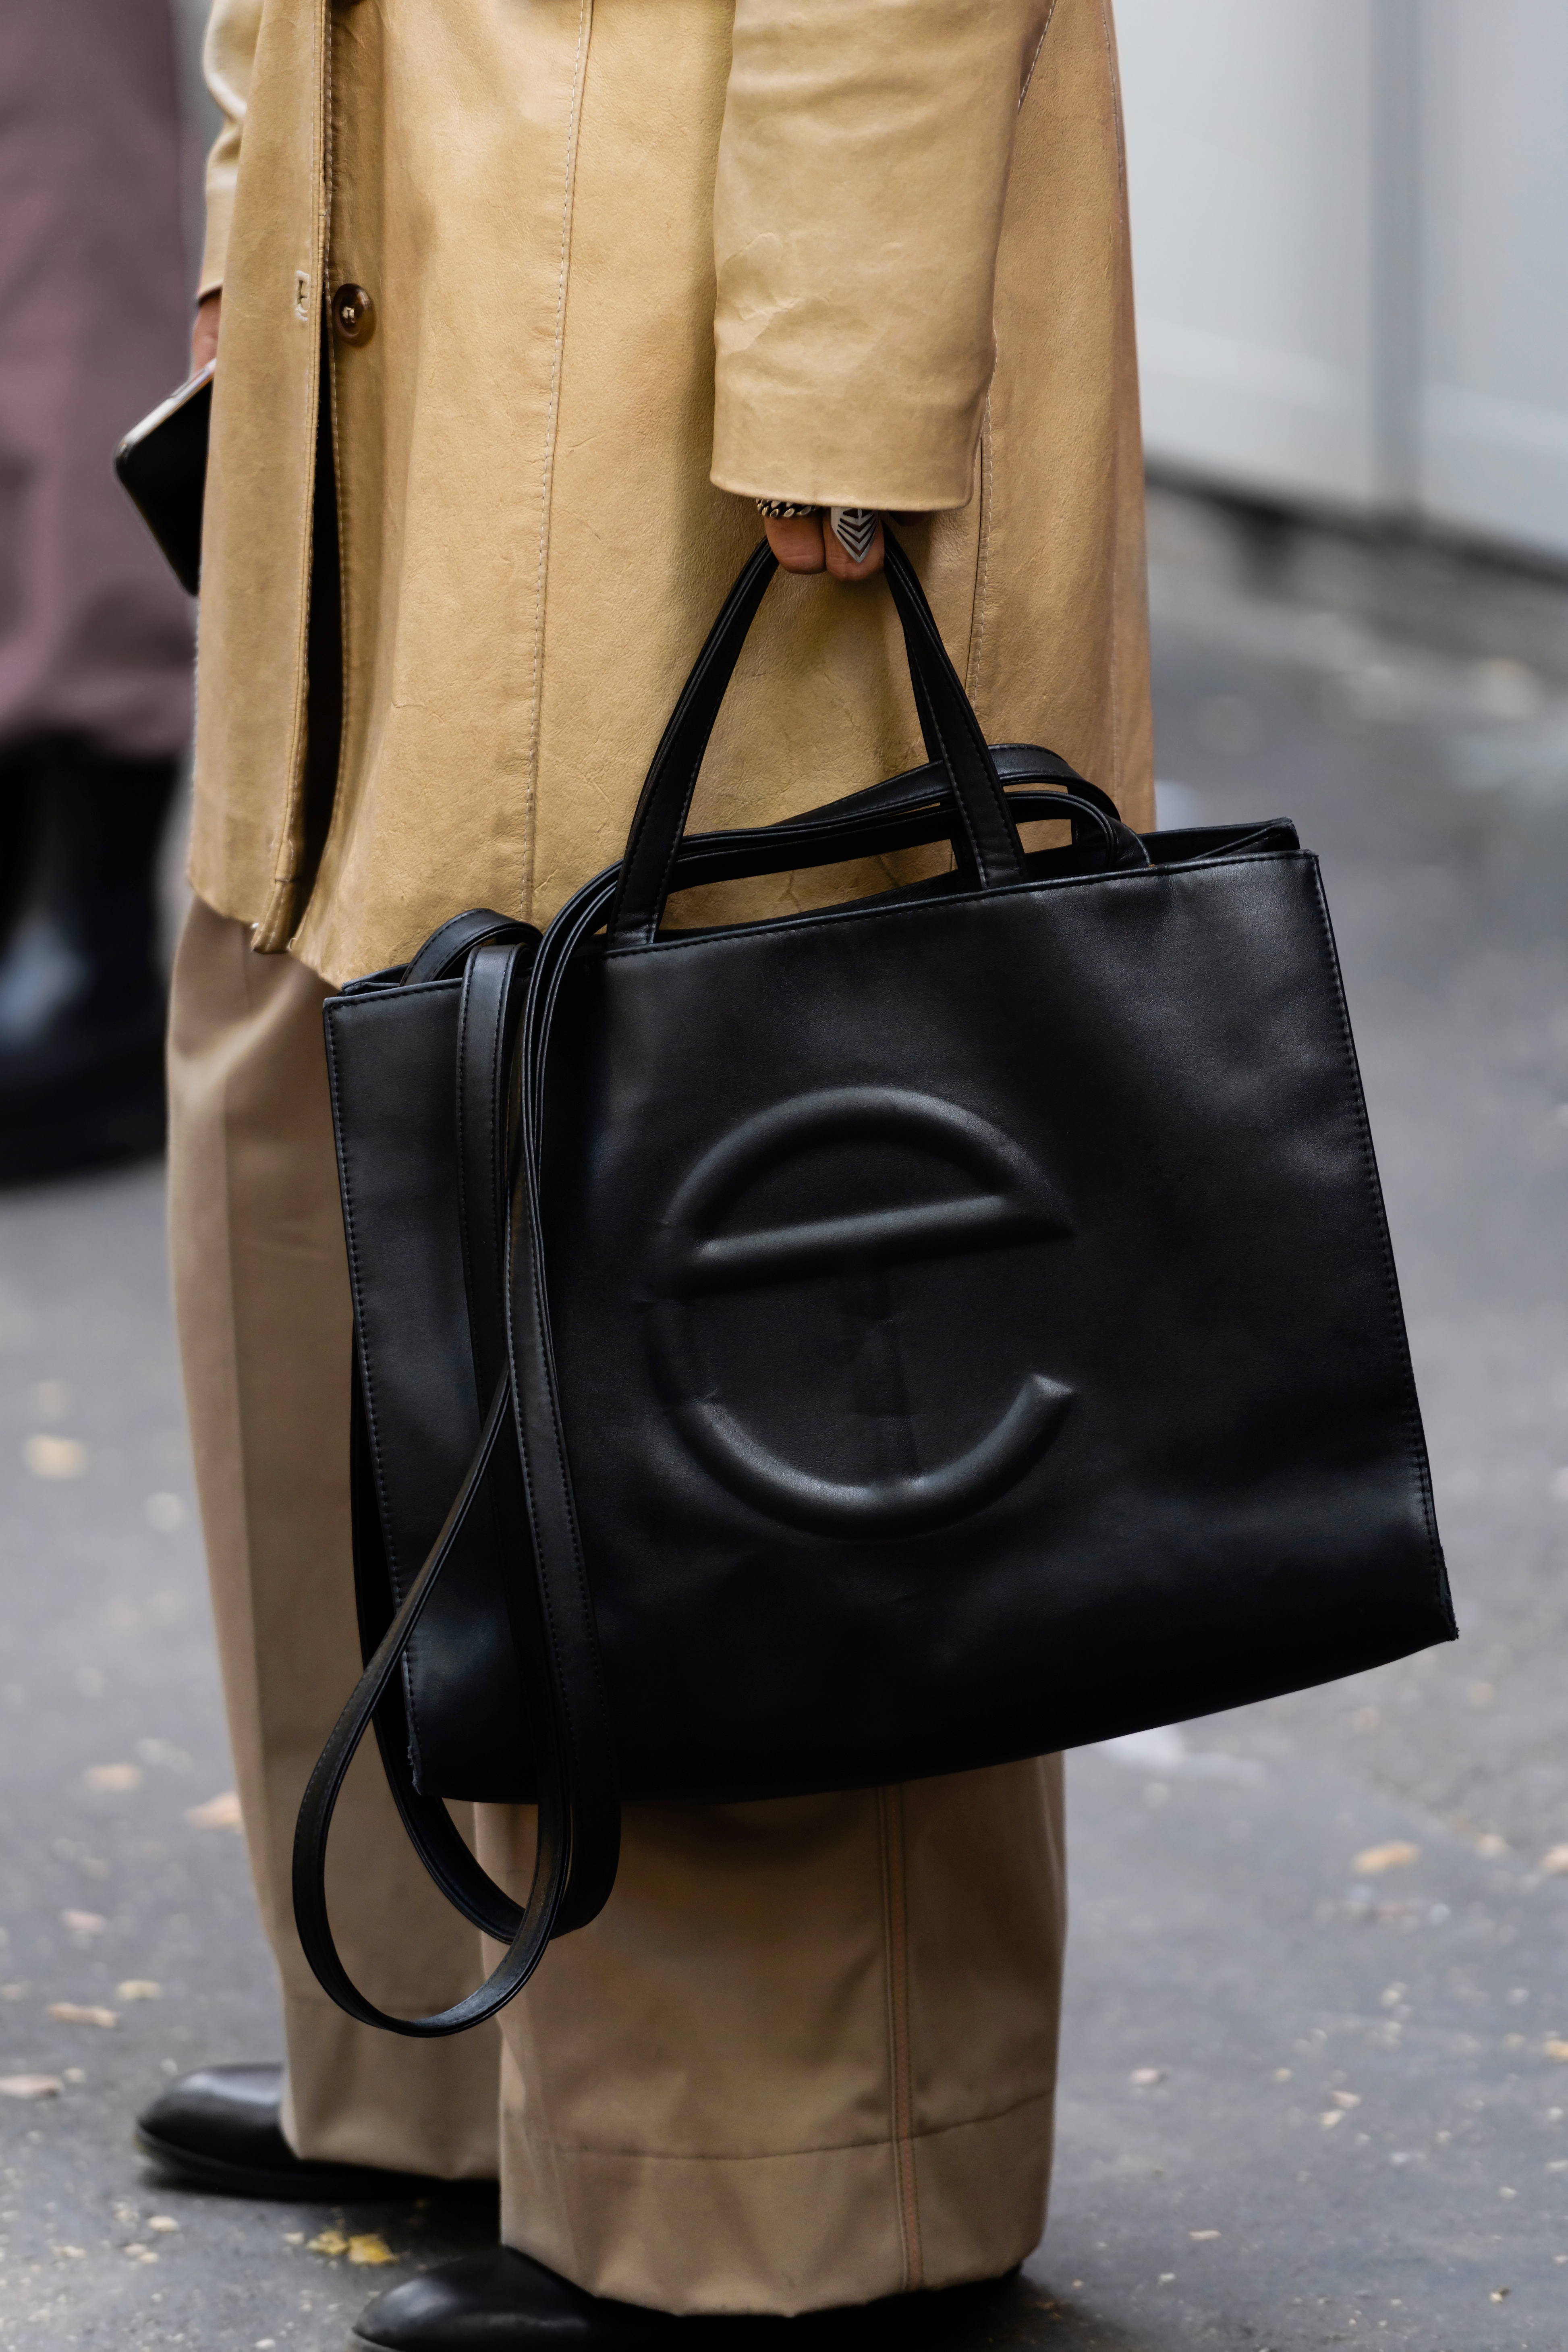 Telfar Bags, Vegan Leather and an Unexpected Lesson